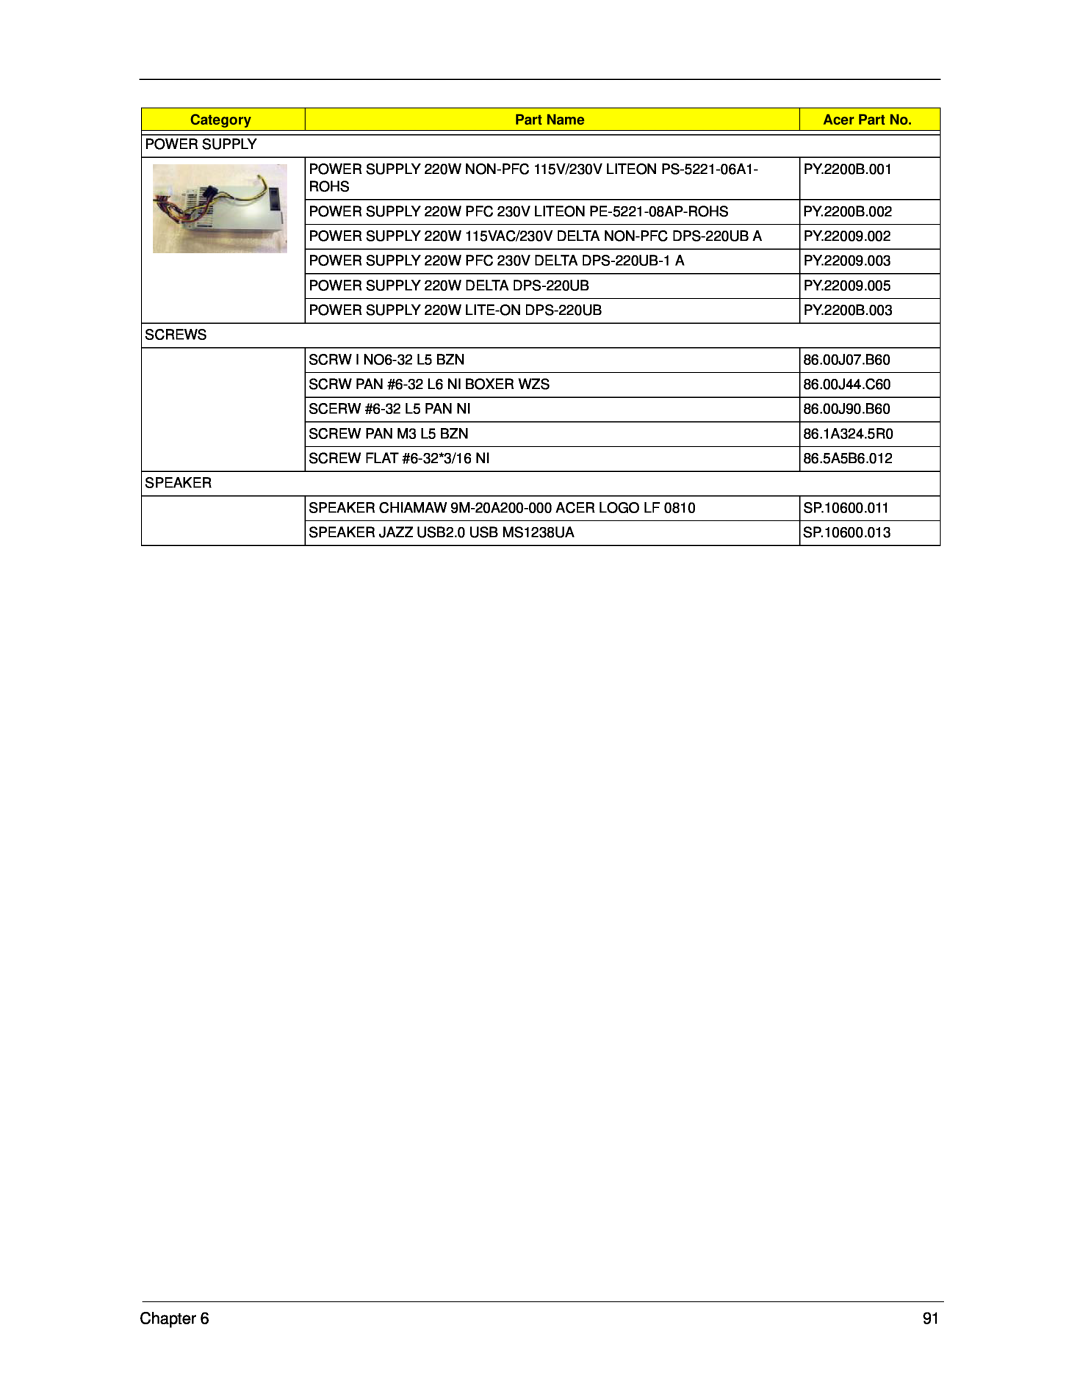 Acer X5300, X3300 manual Chapter, Category, Part Name, Acer Part No 